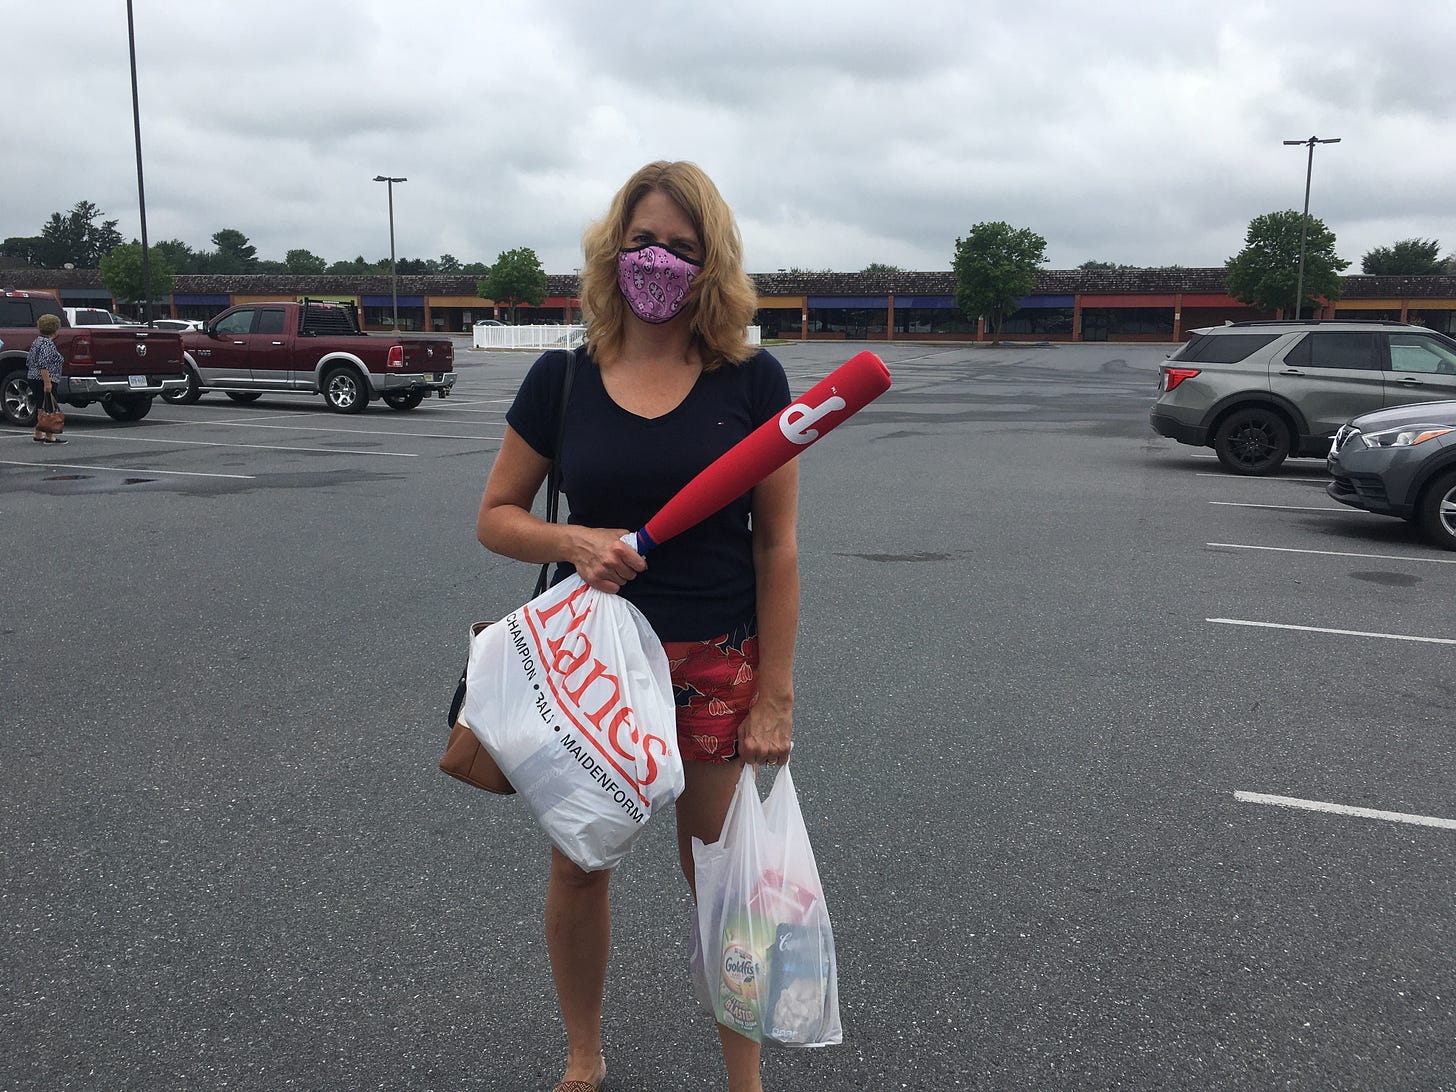 Woman standing in an outlet mall parking lot with bags and a Phillies bat in hand